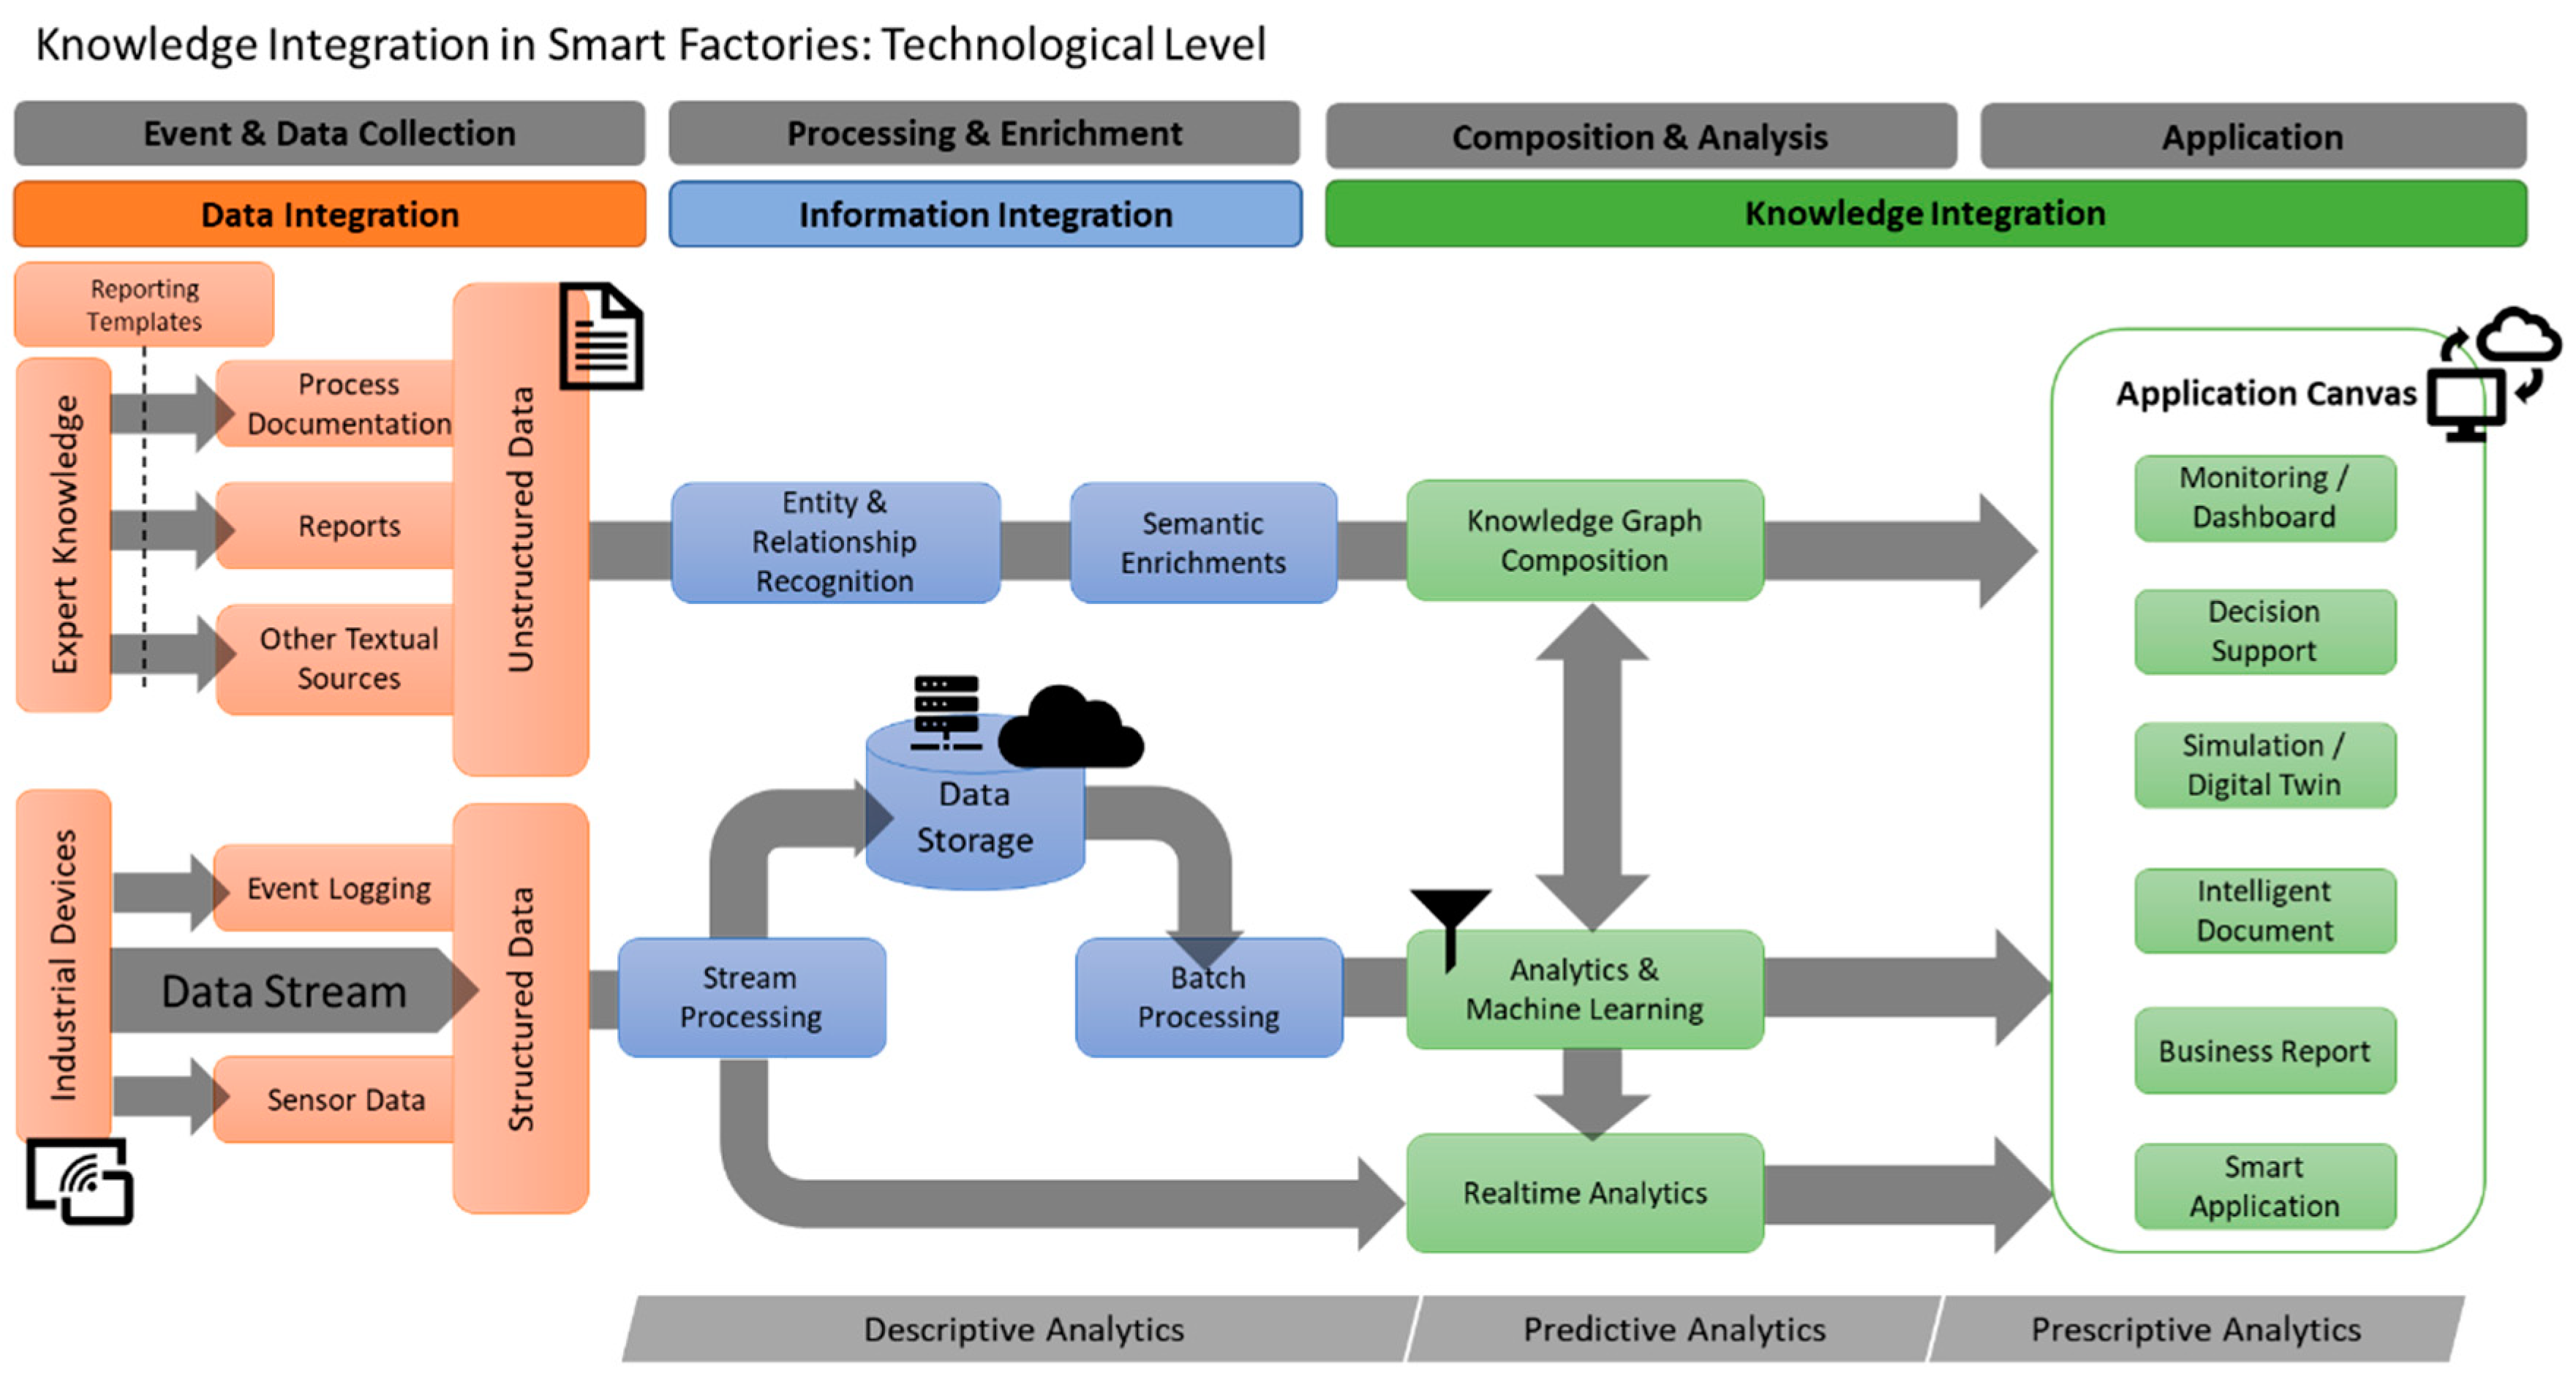 Levelling technology. Knowledge integration & application. SSIS-740. 6- G based Smart Factory. SSIS-808.